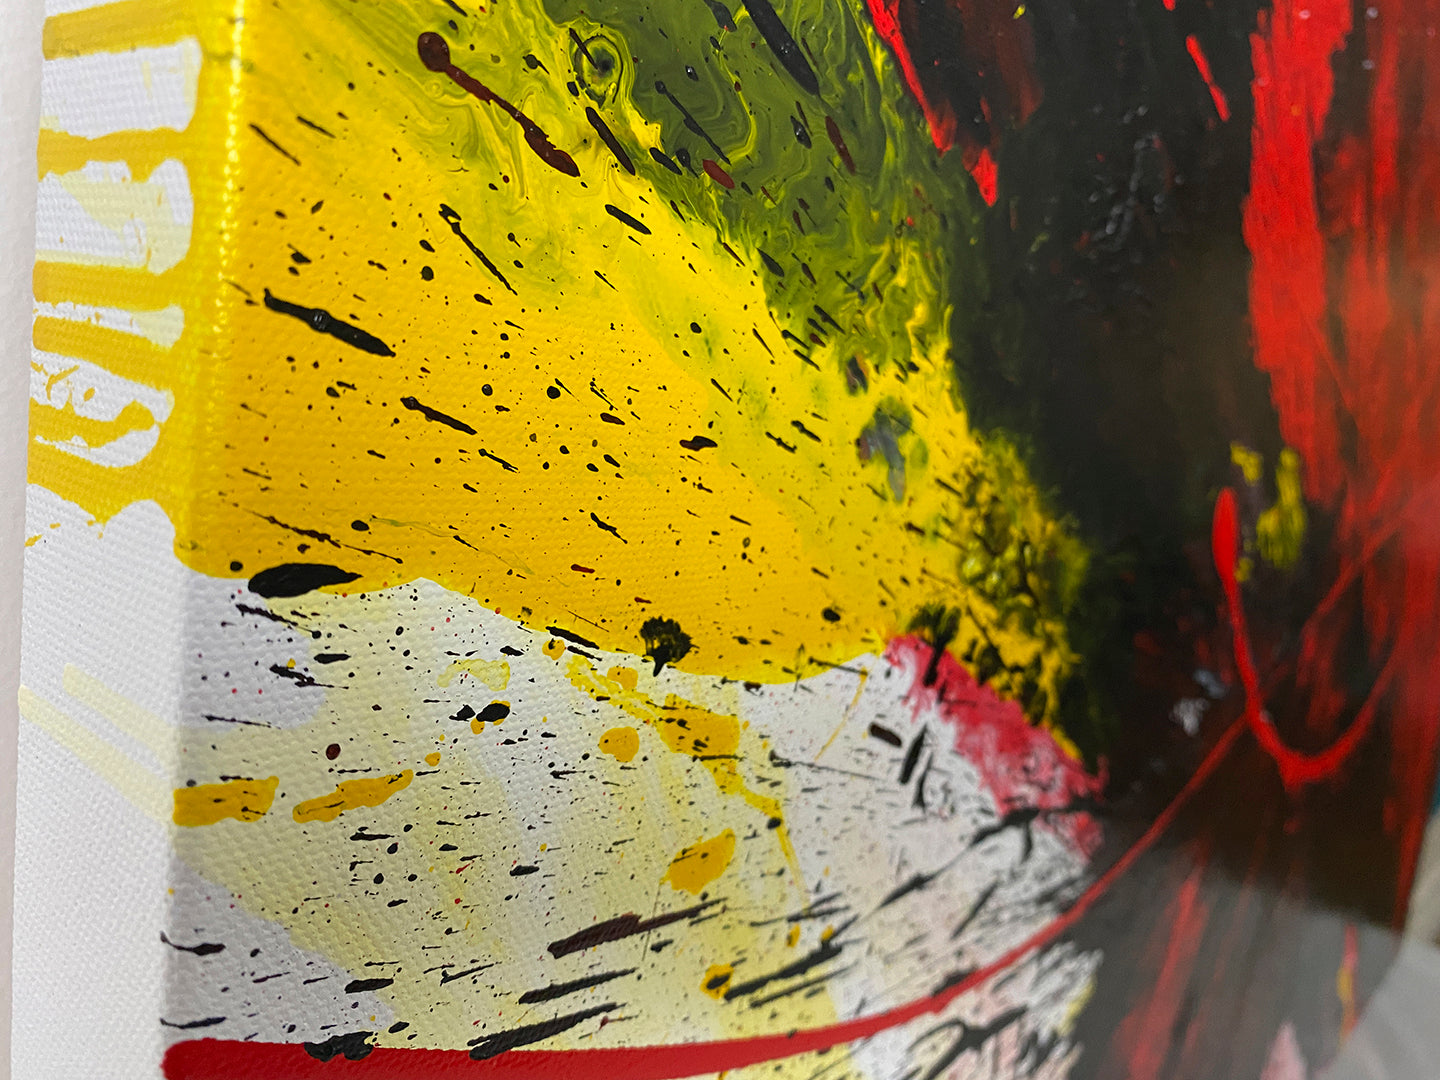 Abstract, expressionism, acrylic painting close-up showing the straight edge 1. Energetic explosion of bright red, black, yellow and white on a Gallery-Wrapped canvas